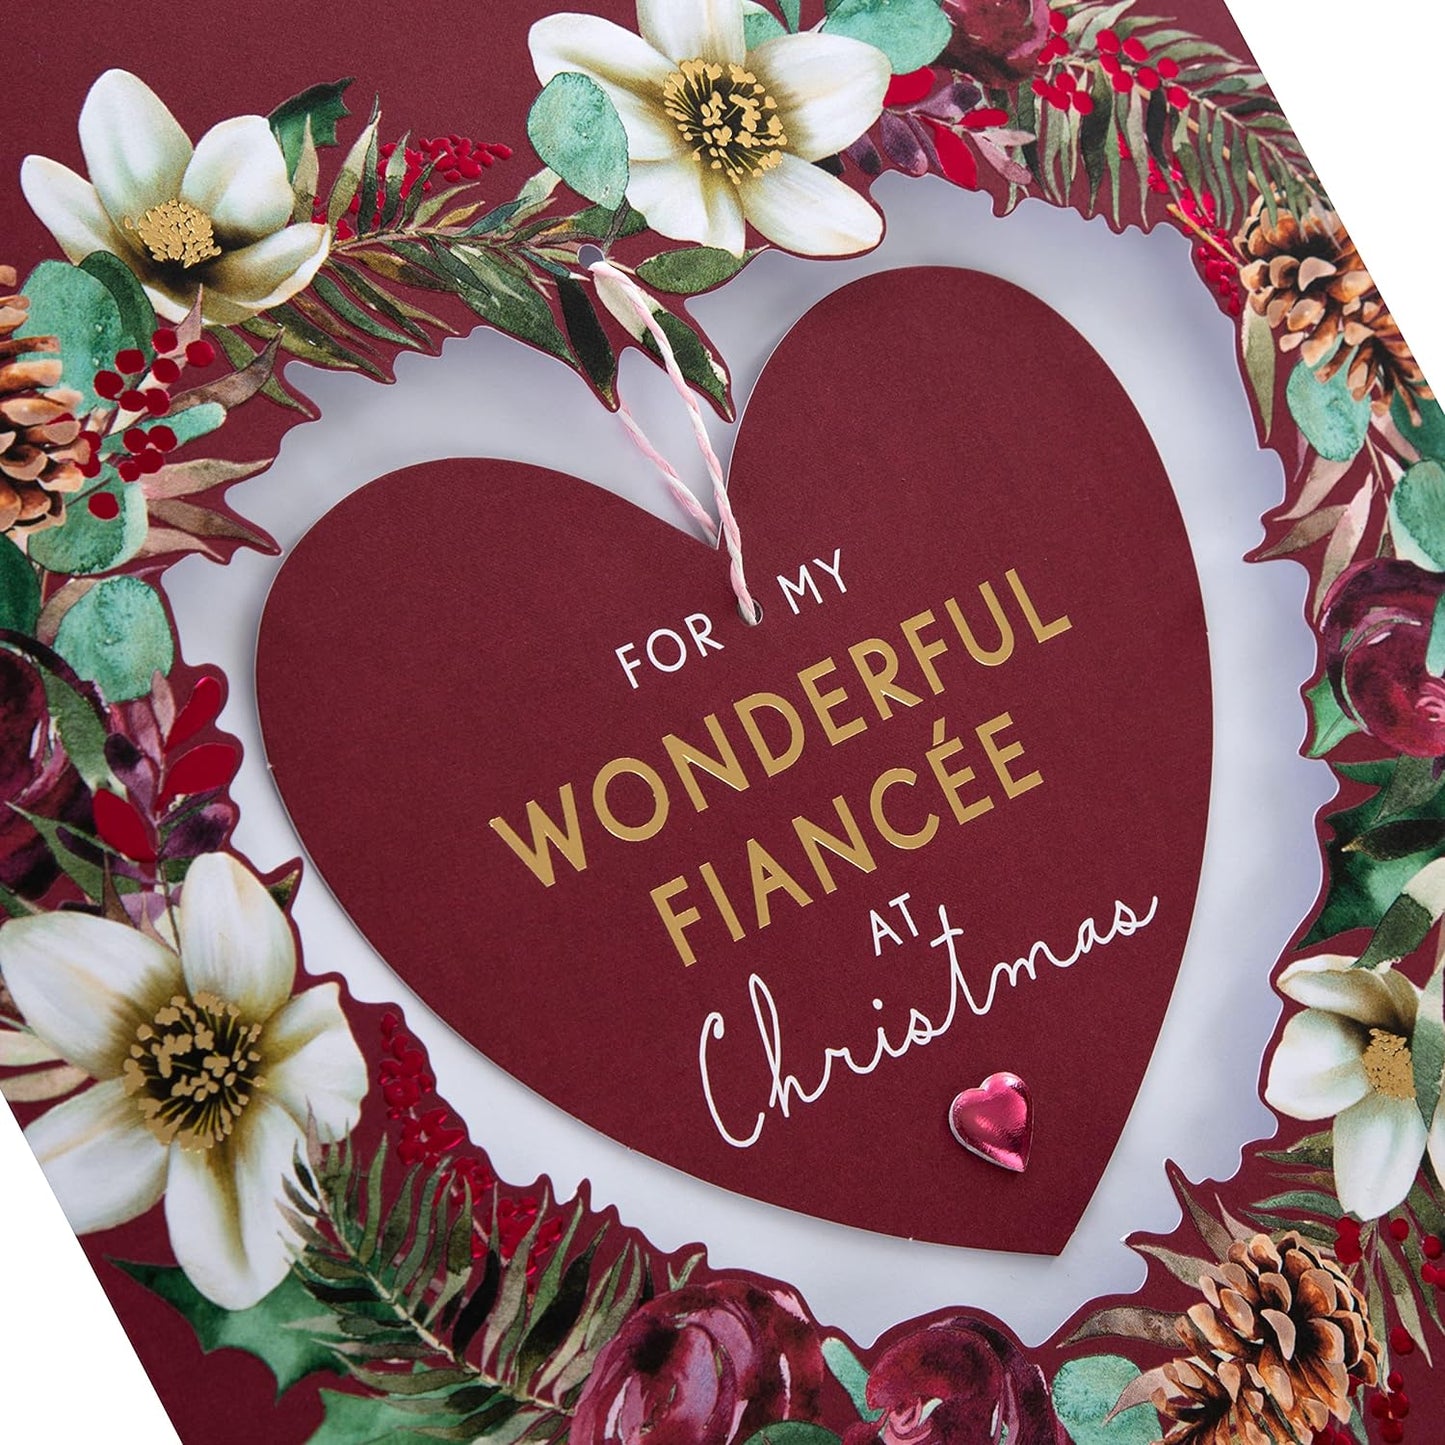 Traditional Heart and Wreath Design Boxed Christmas Card for Fiancée